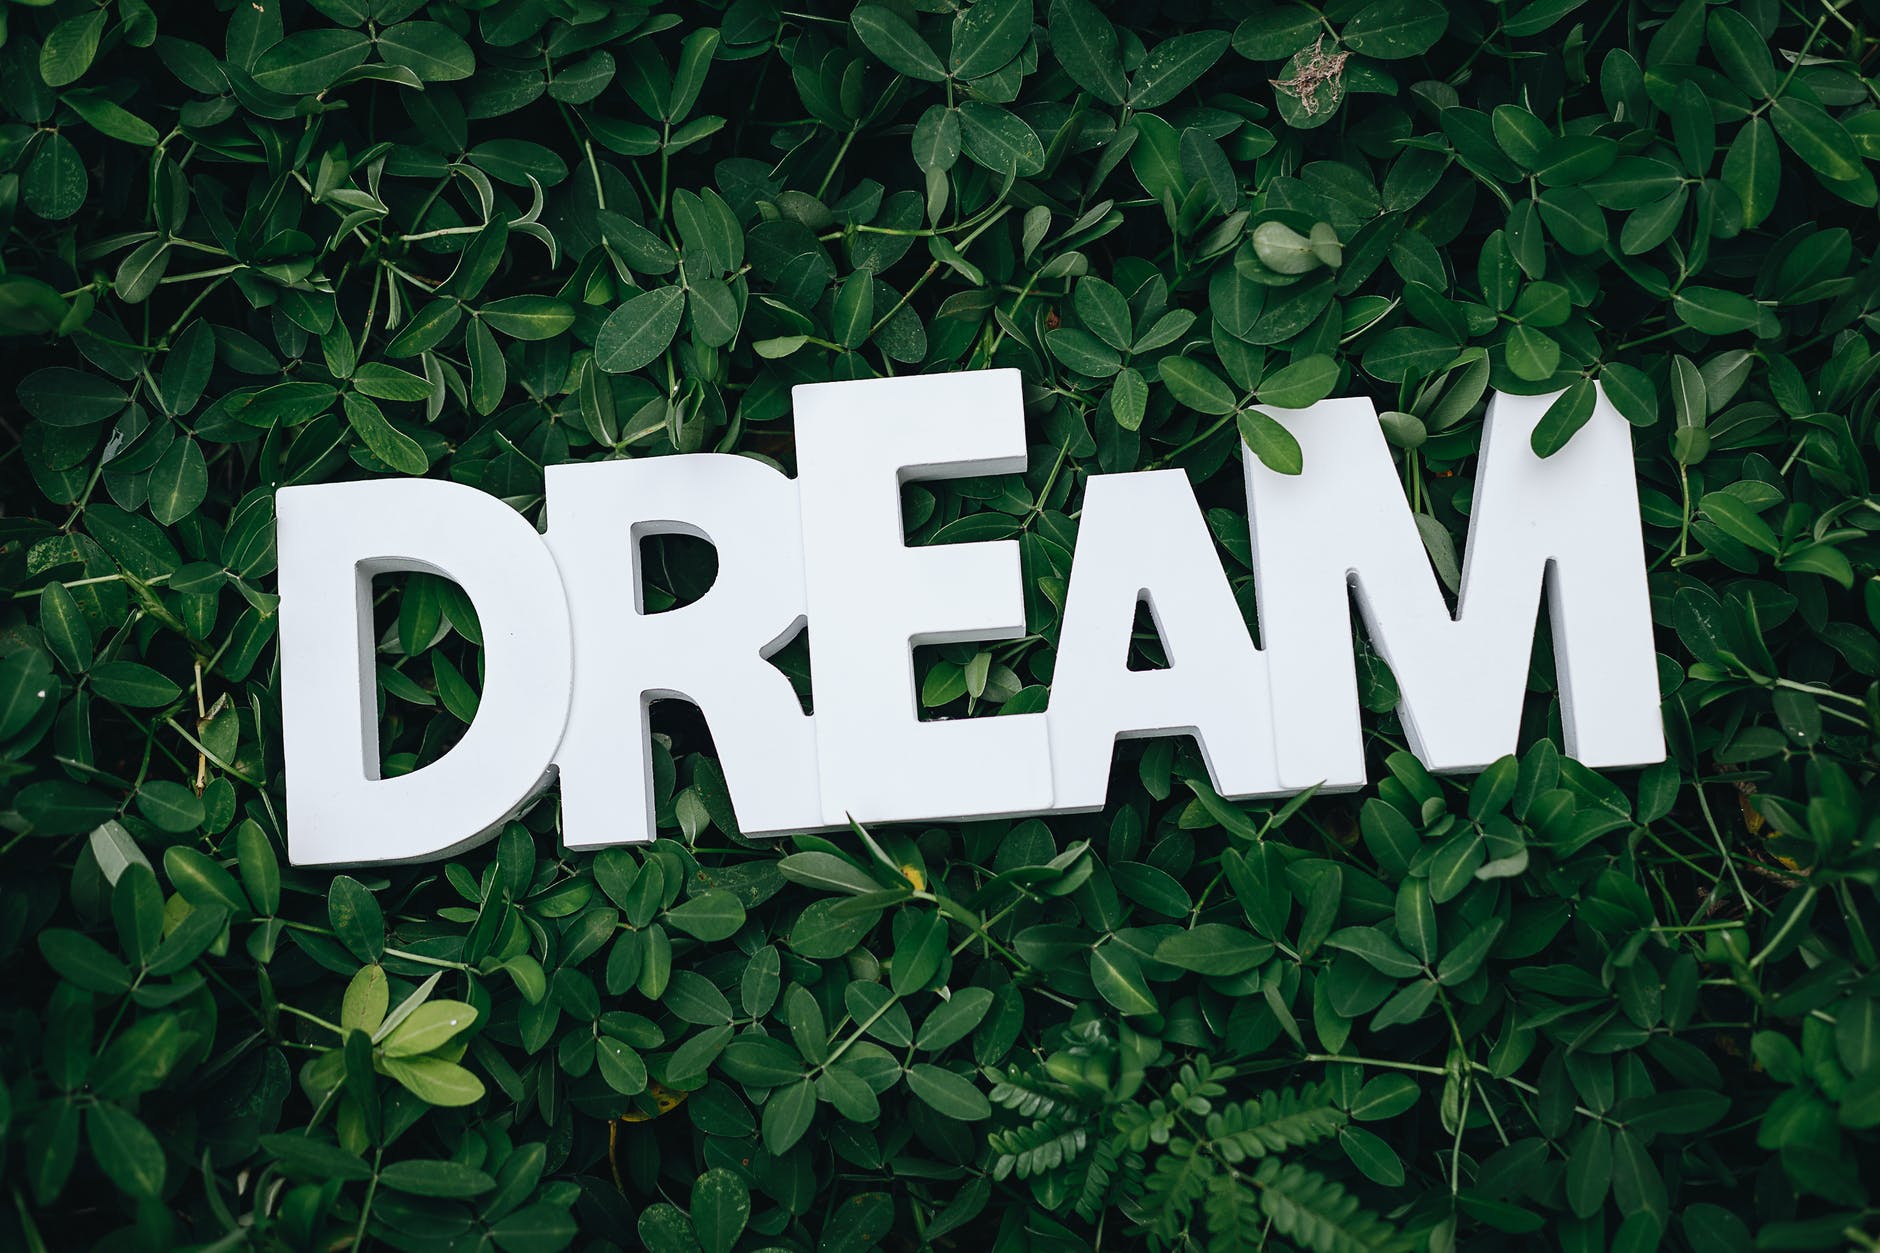 Image of letters spelling 'DREAM' on leaves.